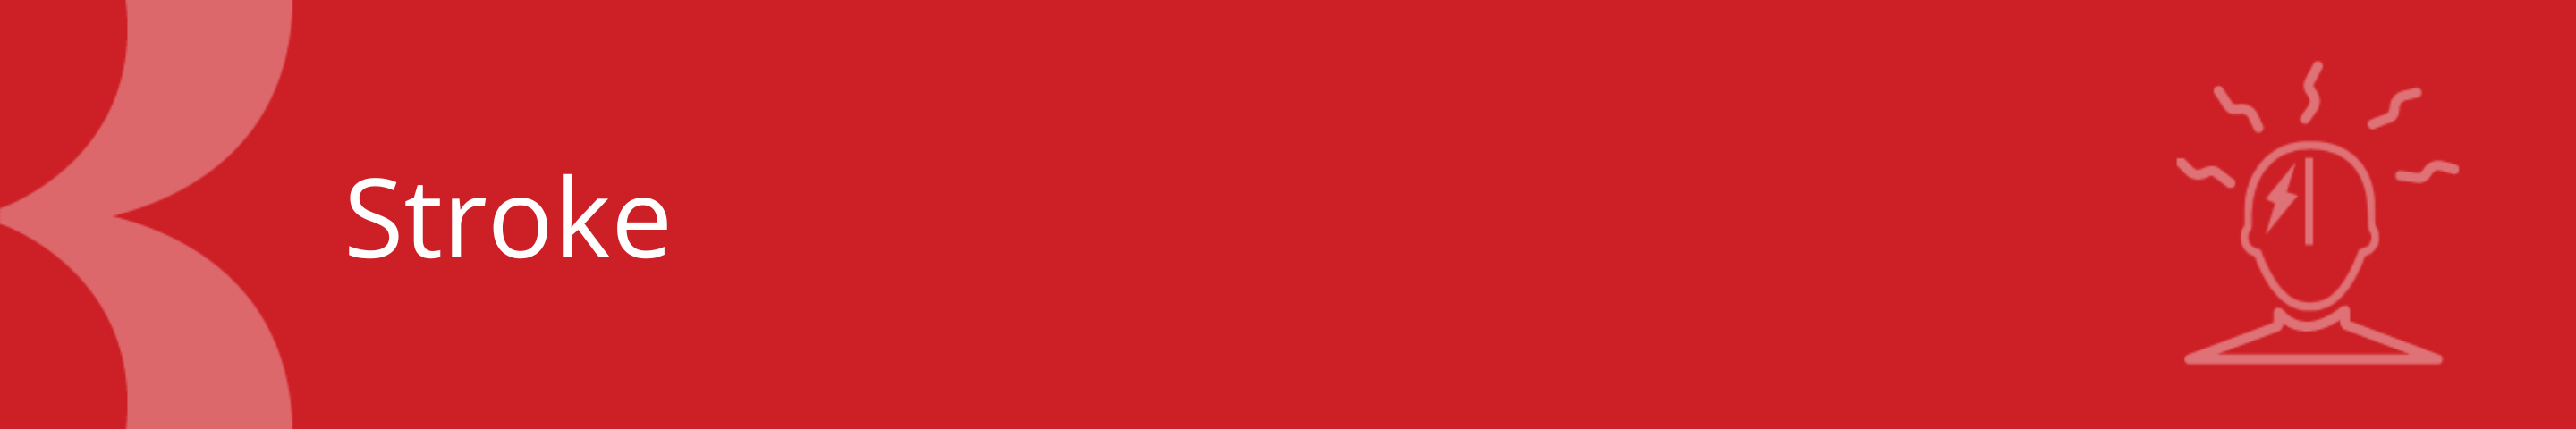 red banner with a shape of a human alerted